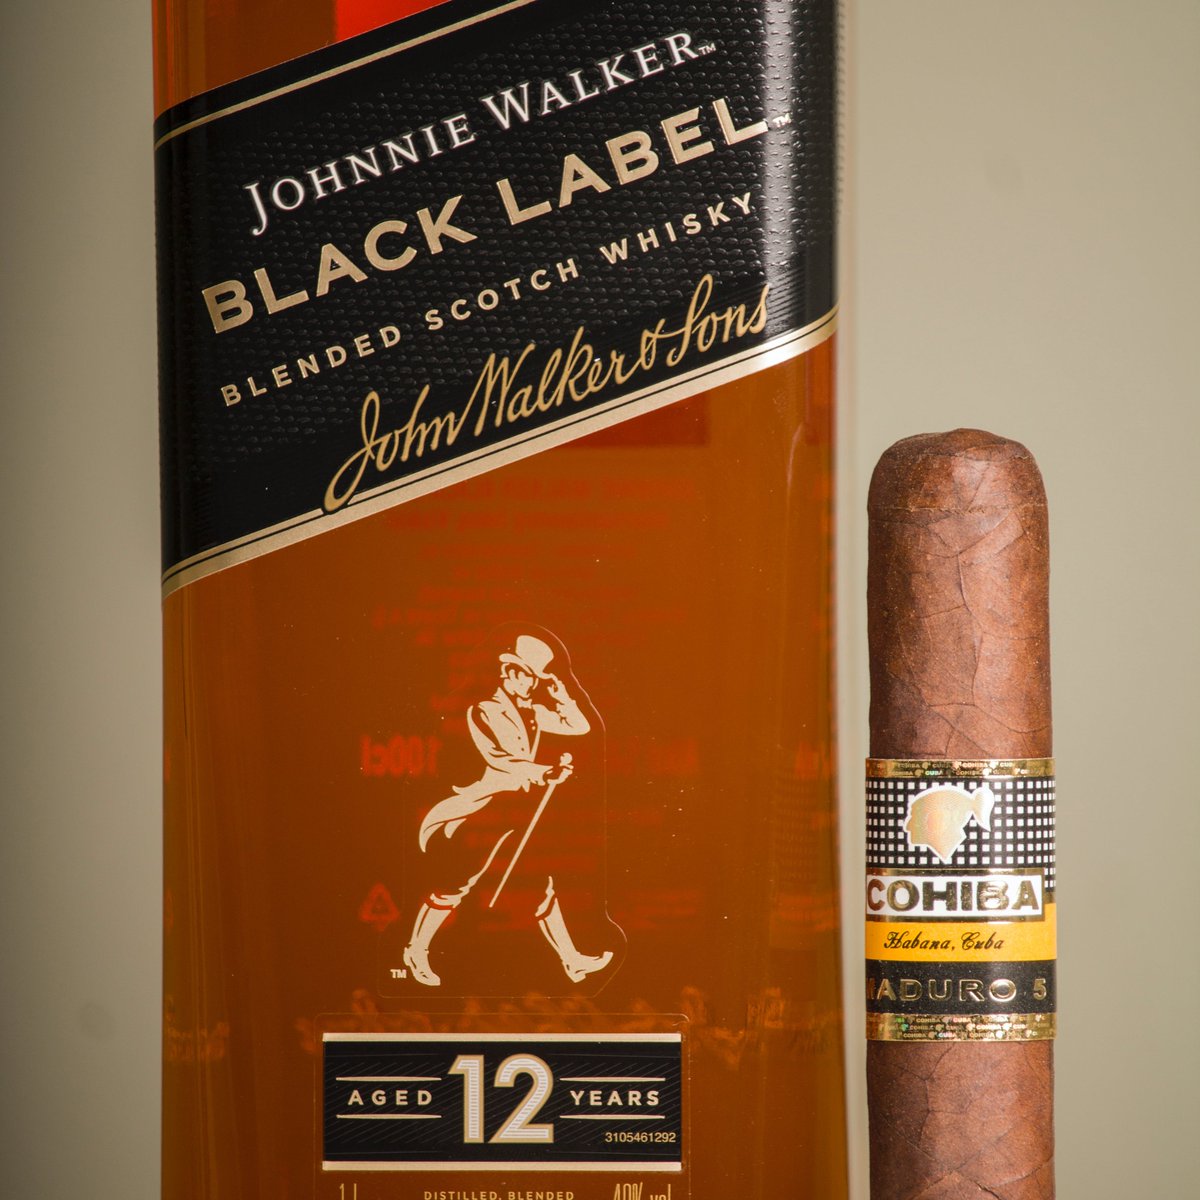 🥃✨ What will be your pairing this weekend? Drop it below!
Whether it's the smooth elegance of Johnnie Walker Black Label or the rich flavors of a Cohiba cigar, let us know how you'll be indulging. #WeekendPairings #TheDarlingHouse #Indulge #Whisky #Cohiba